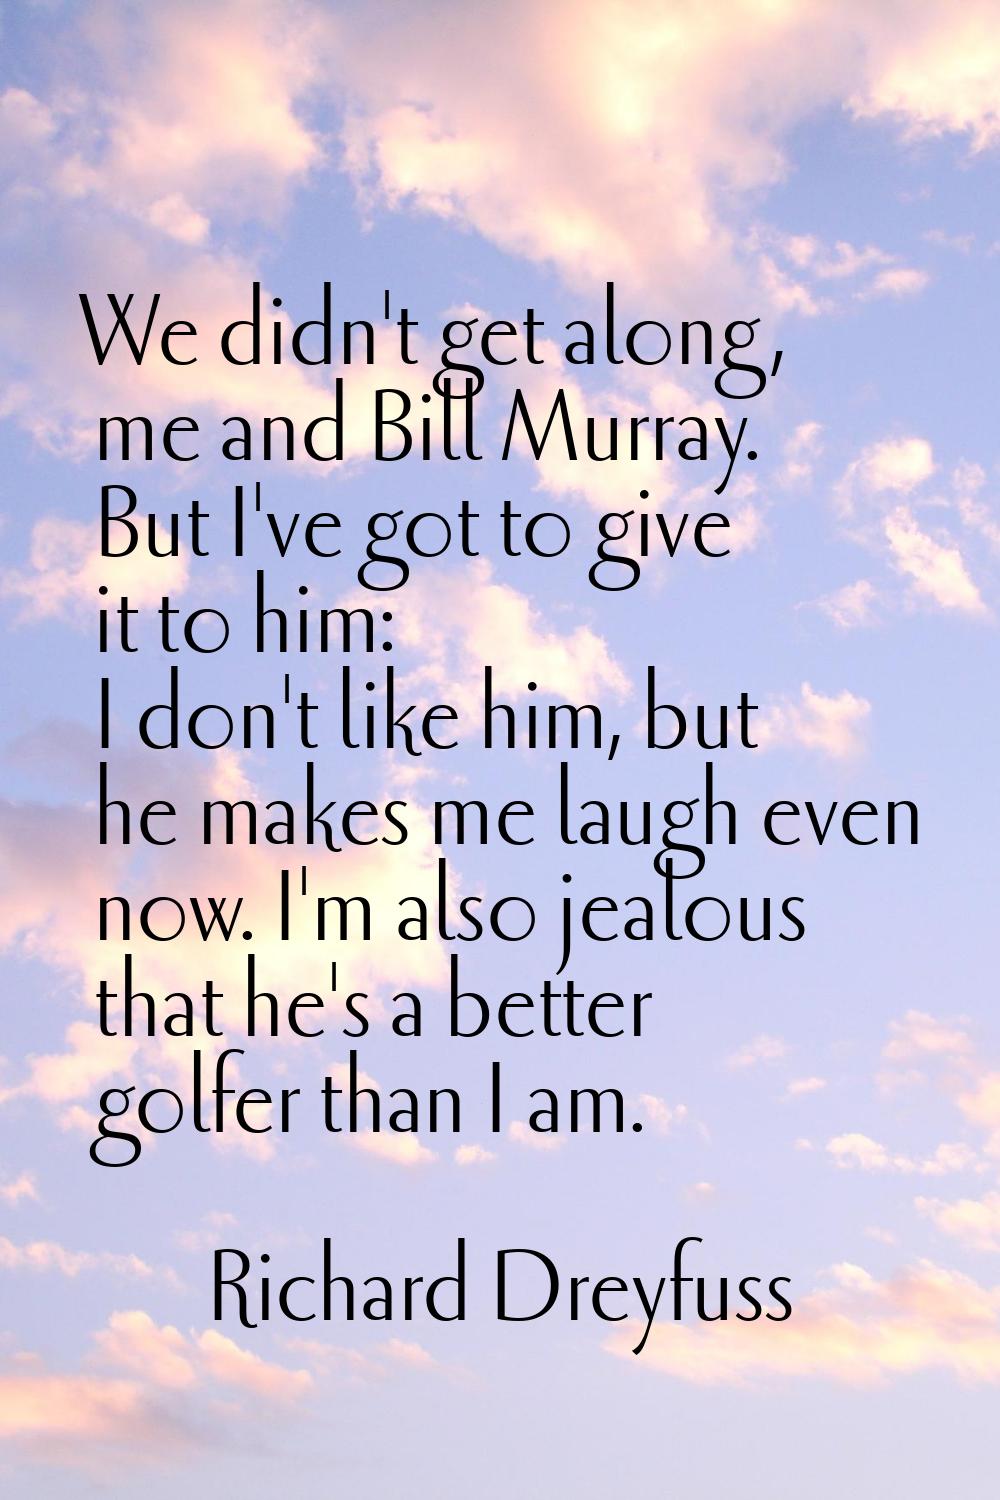 We didn't get along, me and Bill Murray. But I've got to give it to him: I don't like him, but he m